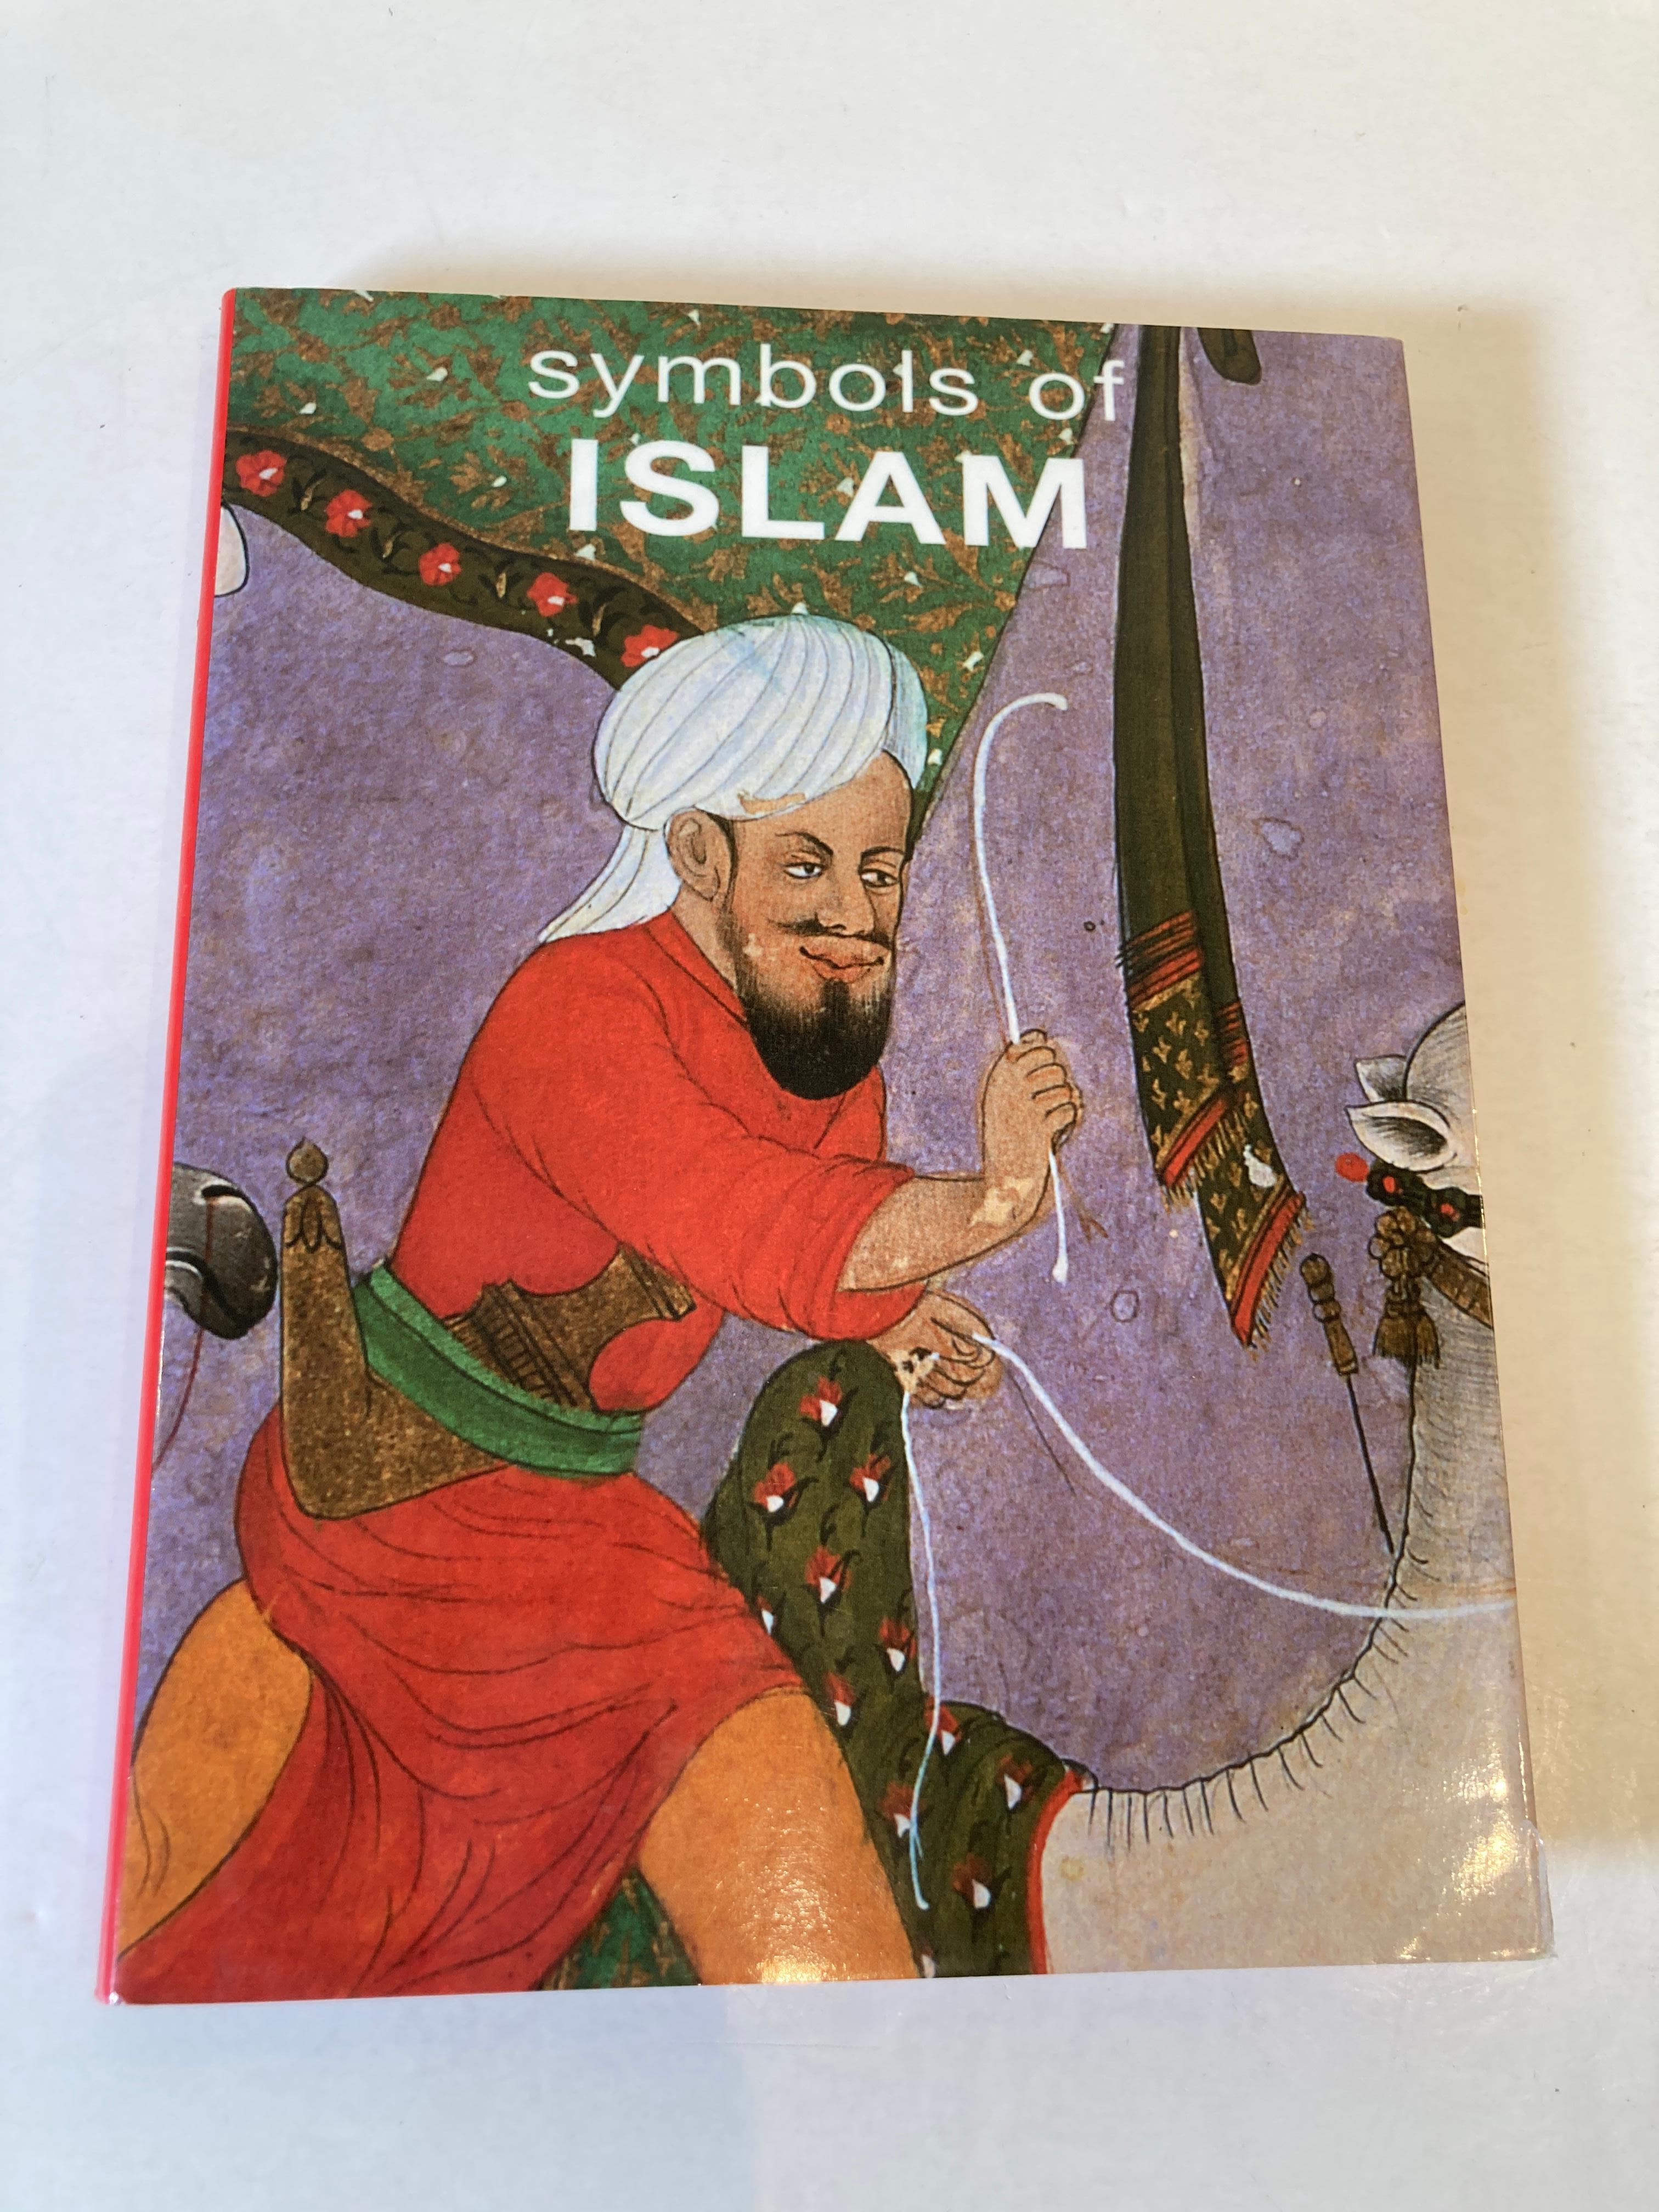 Symbols of Islam by Malek Chebel.
Published by Assouline Publishing (2001)
A visual synthesis of the Arab-Islamic world, which continues to grow and gain a global presence.
Provides meaning, history, and cultural significance to twenty-two